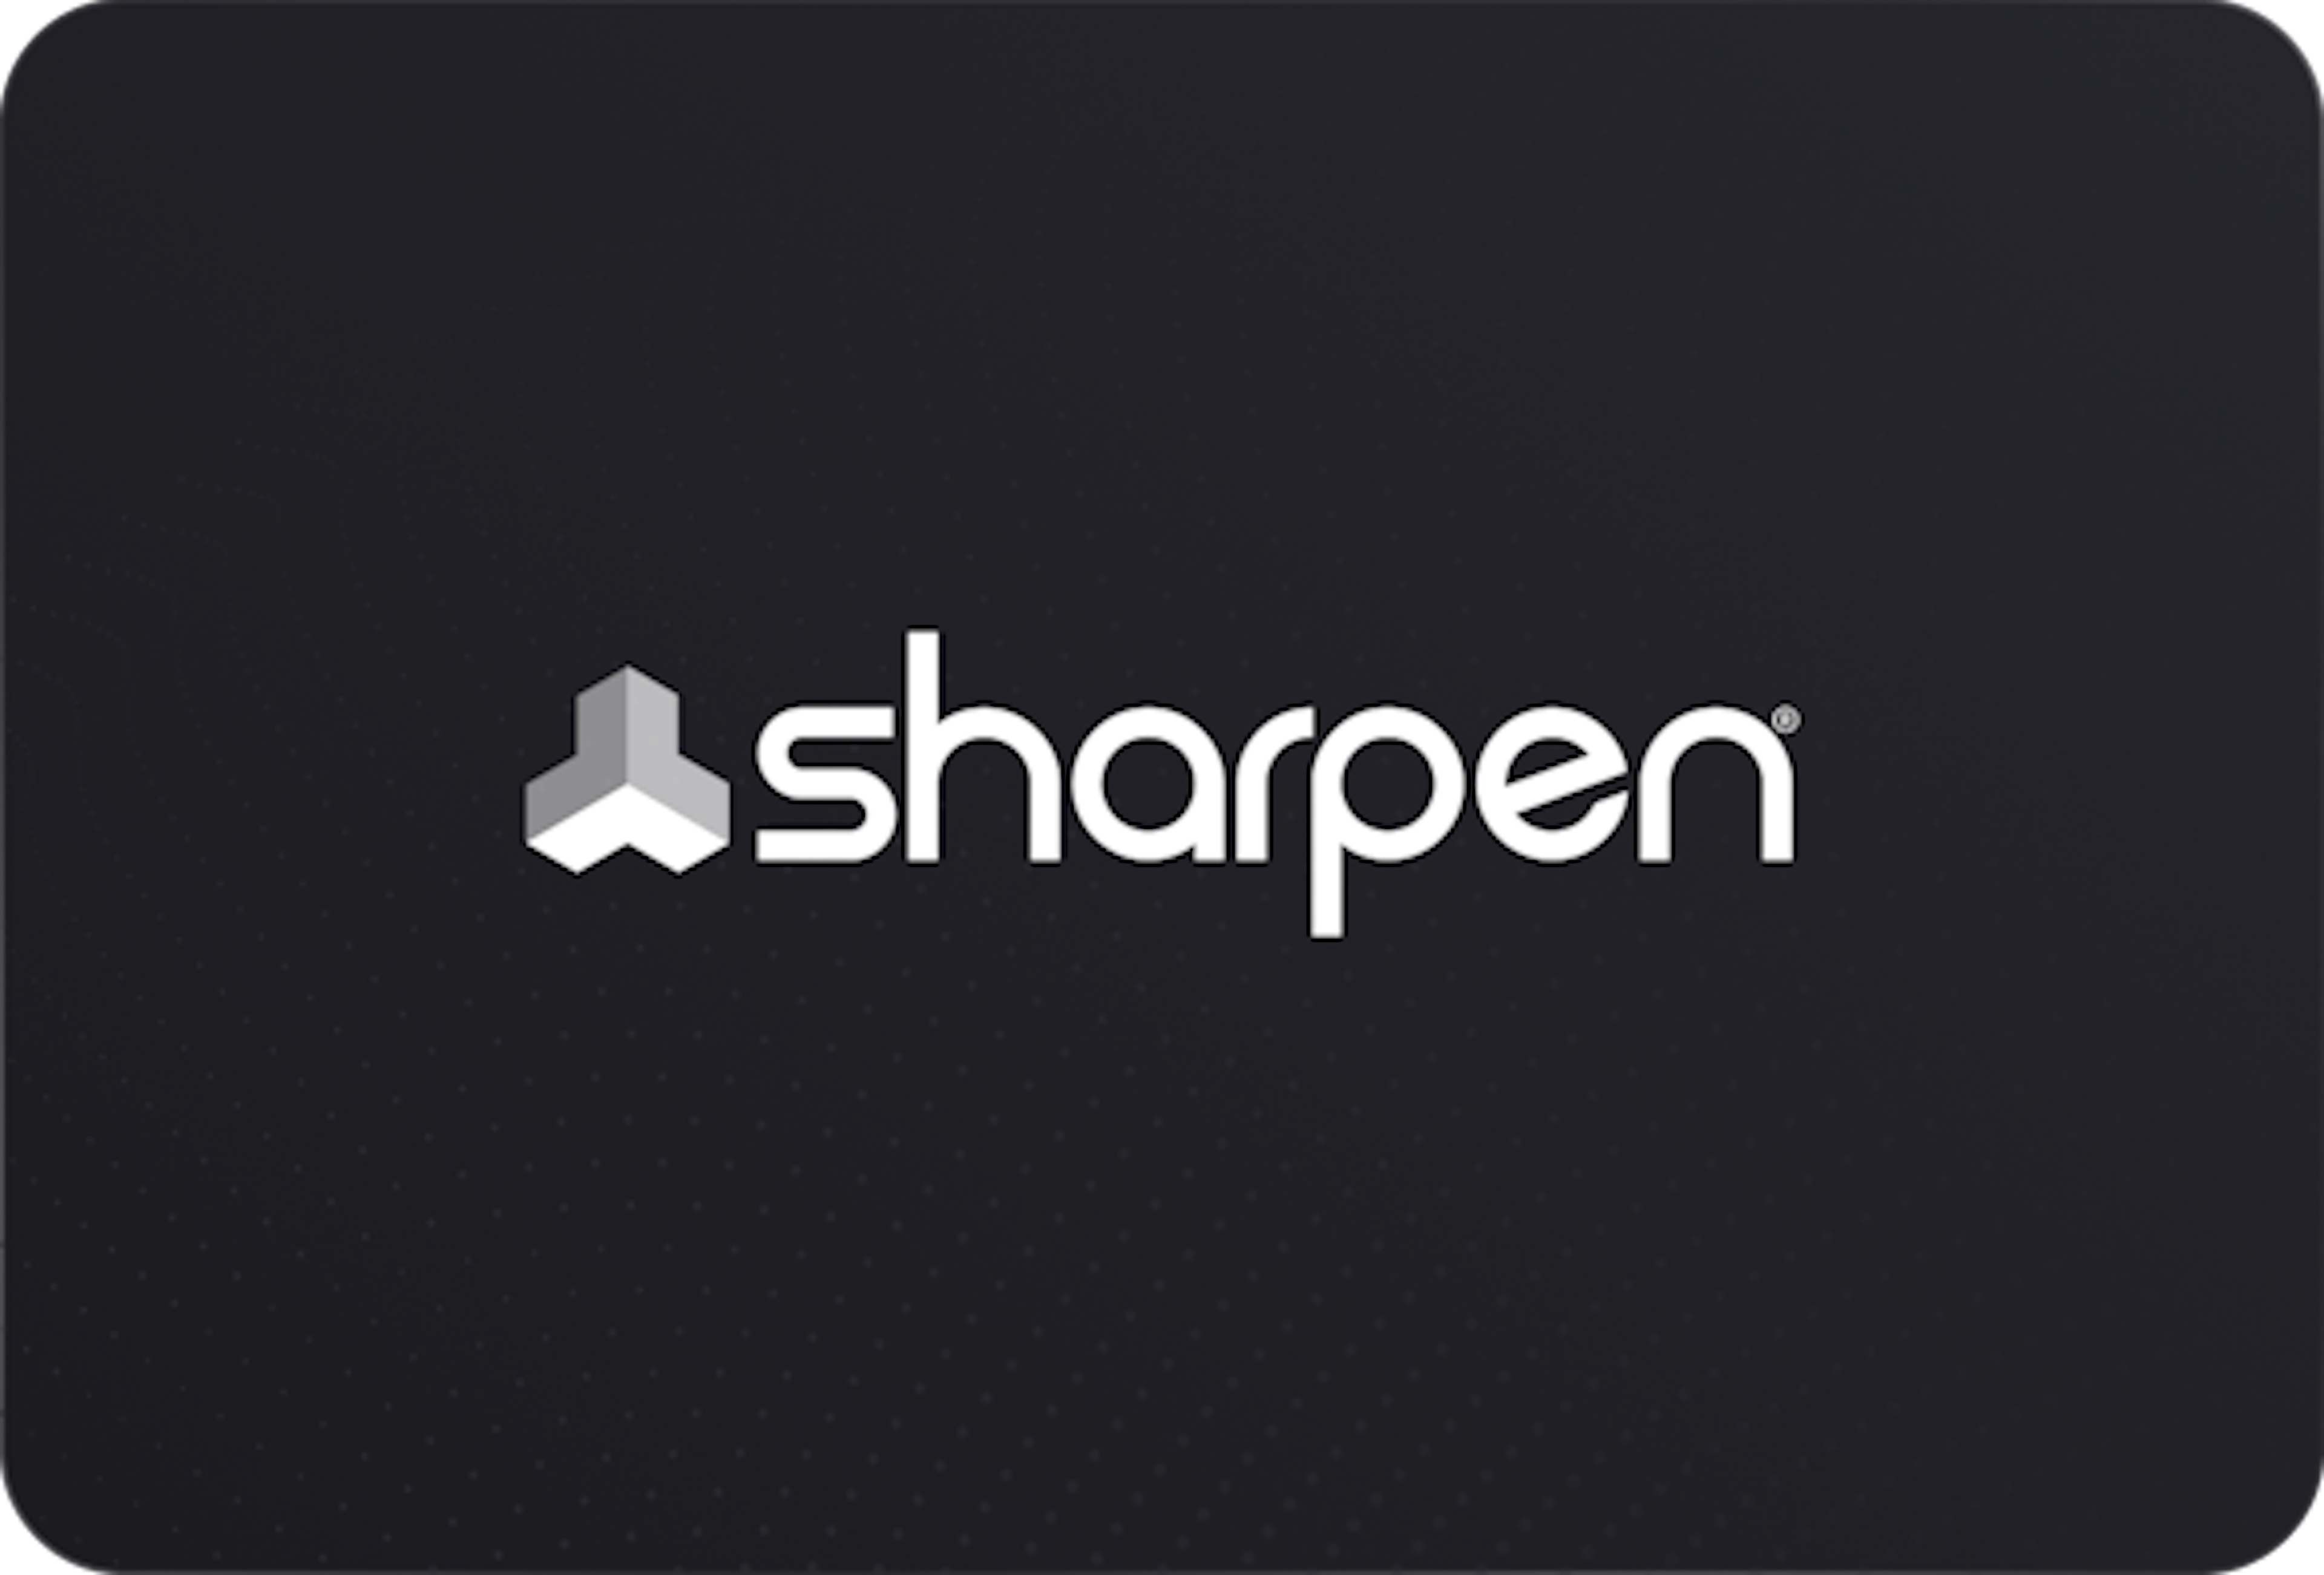 Sharpen elevates the contact center customer experience with Deepgram